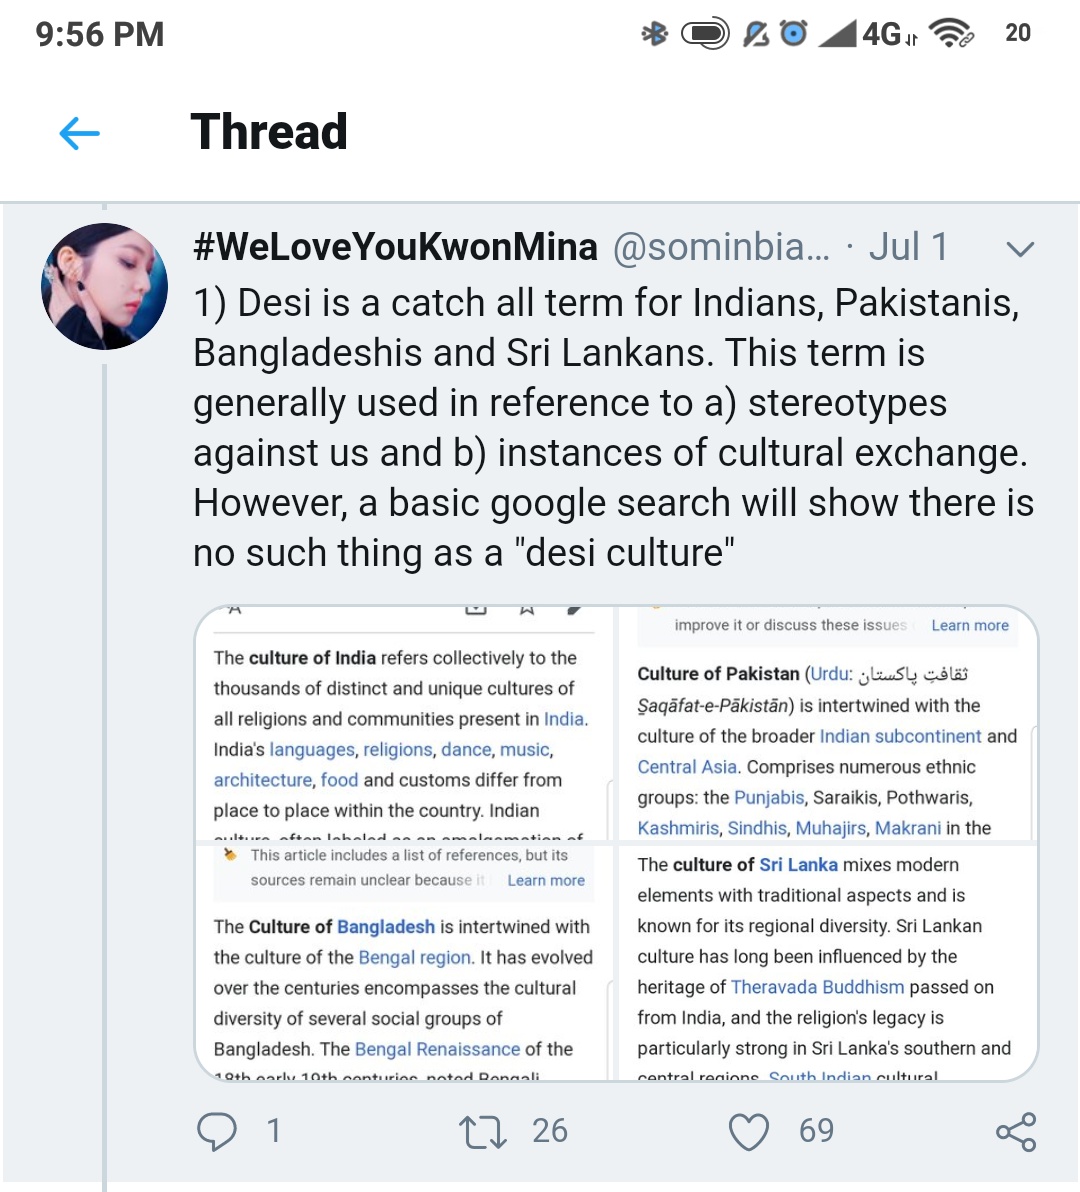 Do I have to explain what's wrong? She is denying the whole existence of desi culture. It's an umbrella term for these countries belonging to the Indian subcontinent. All these countries share several cultural elements with each other as well as having a shared history.